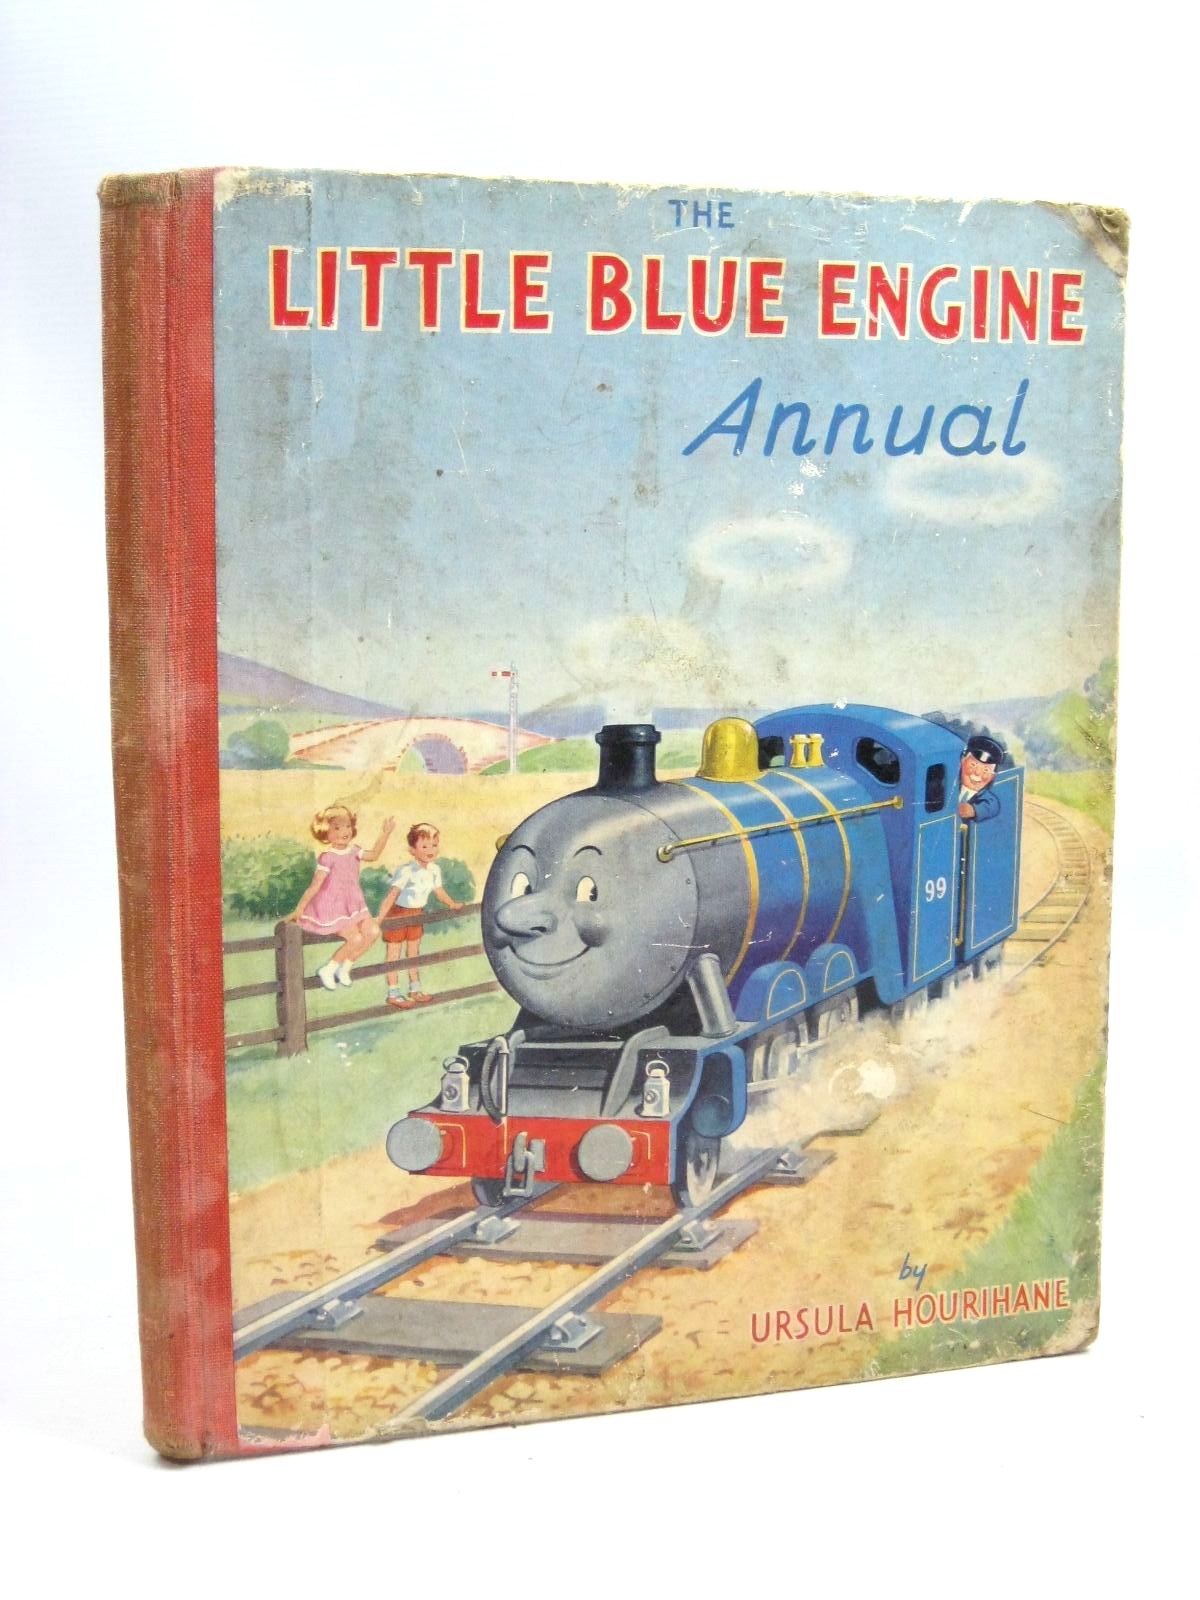 Stella Rose S Books The Little Blue Engine Annual Written By Ursula Hourihane Stock Code 1405523